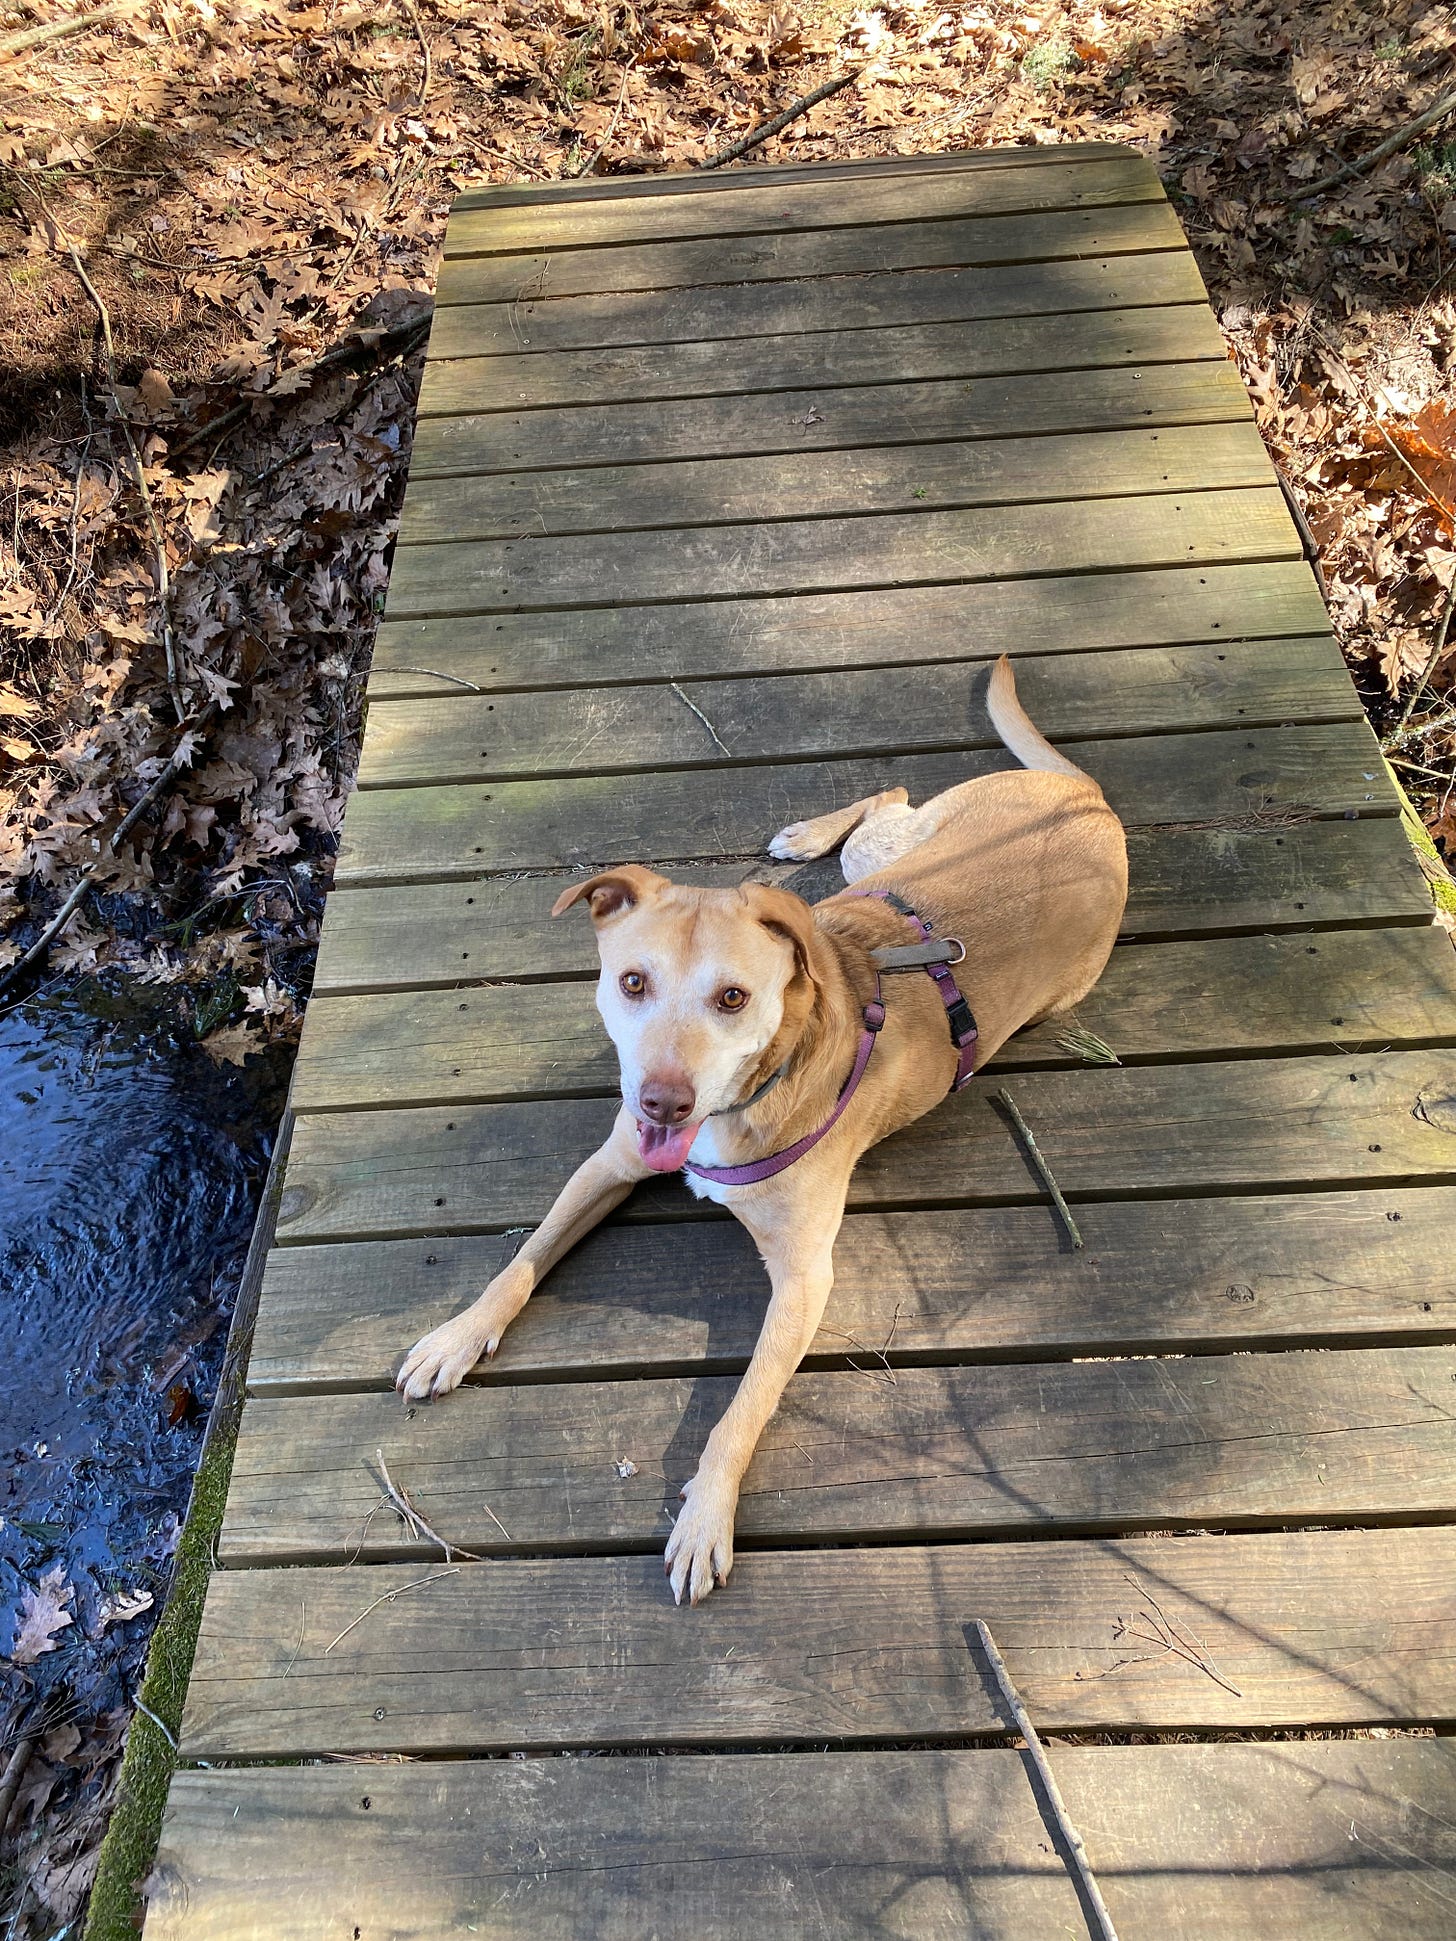 Nessa lying on a wooden bridge over a small stream. Her front paws are extended and she’s smiling with her tongue hanging out.